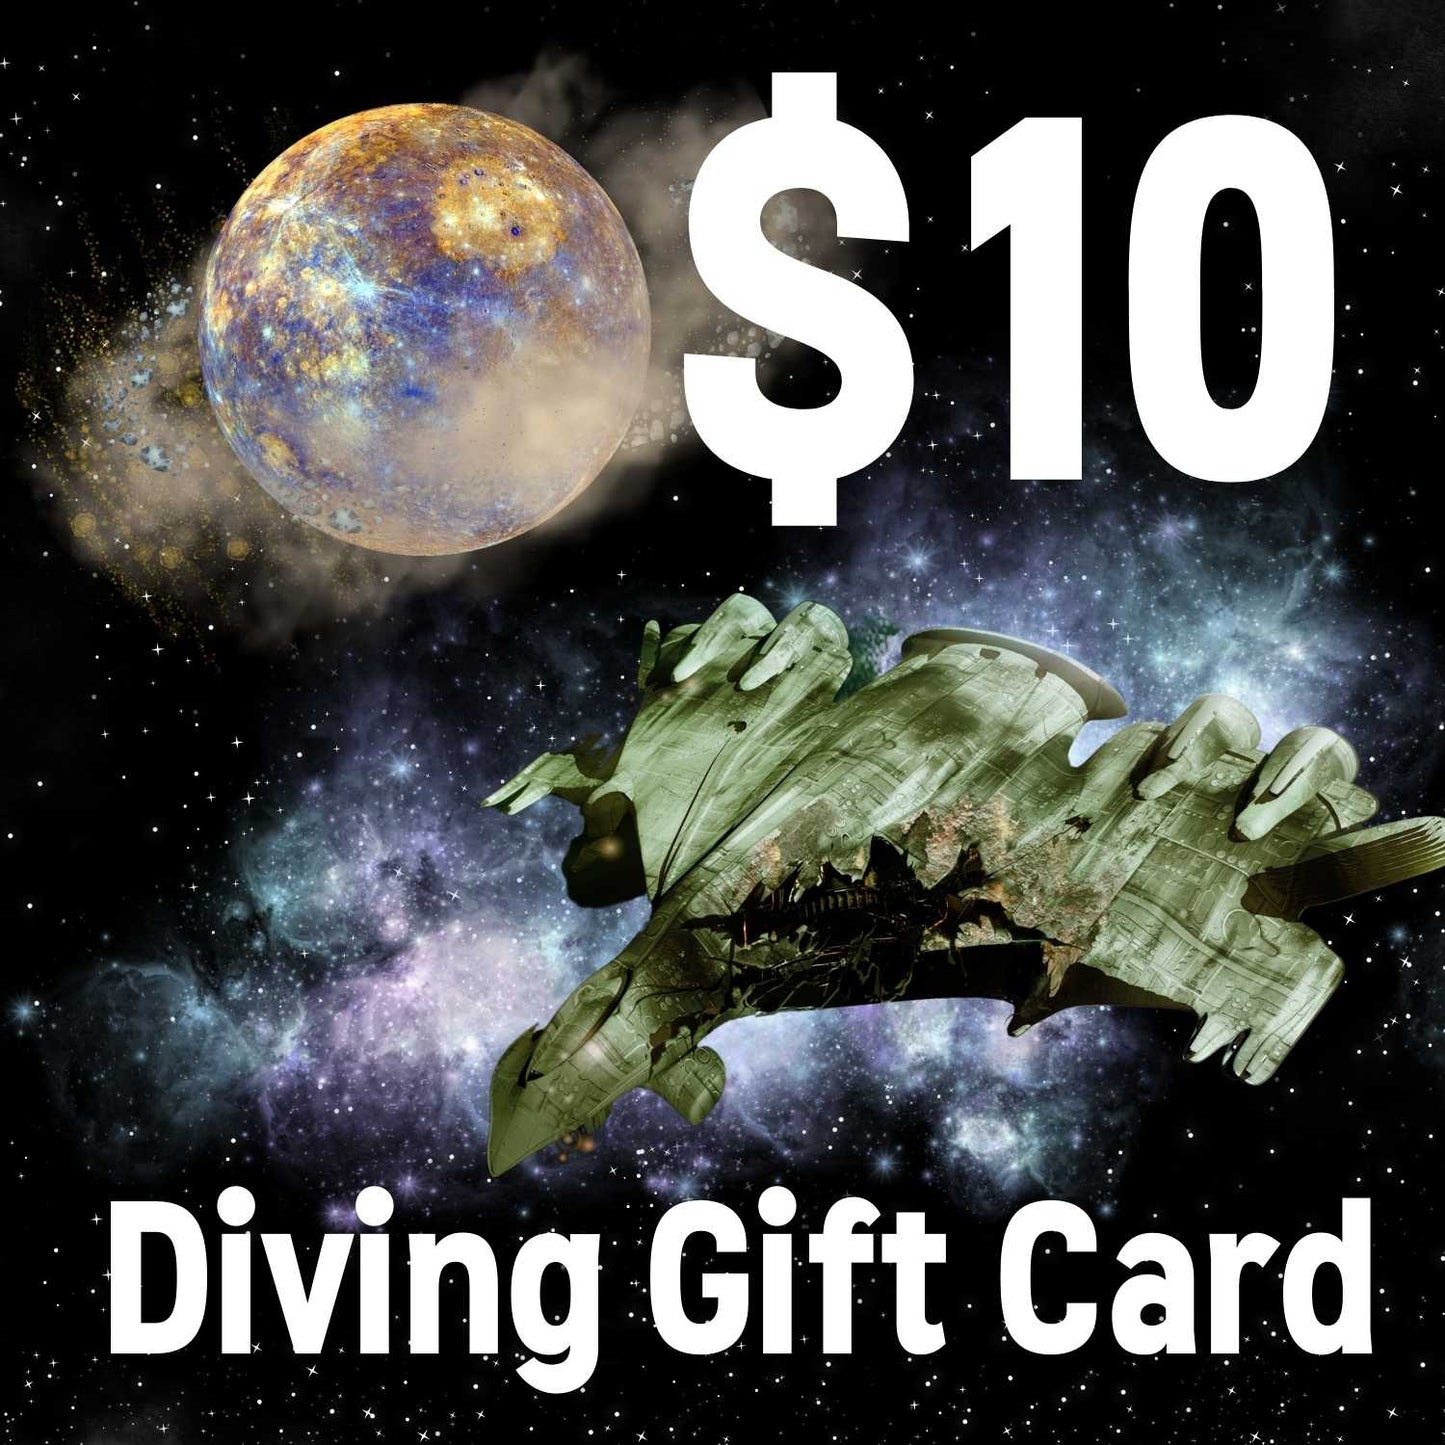 The Diving Universe Gift Card